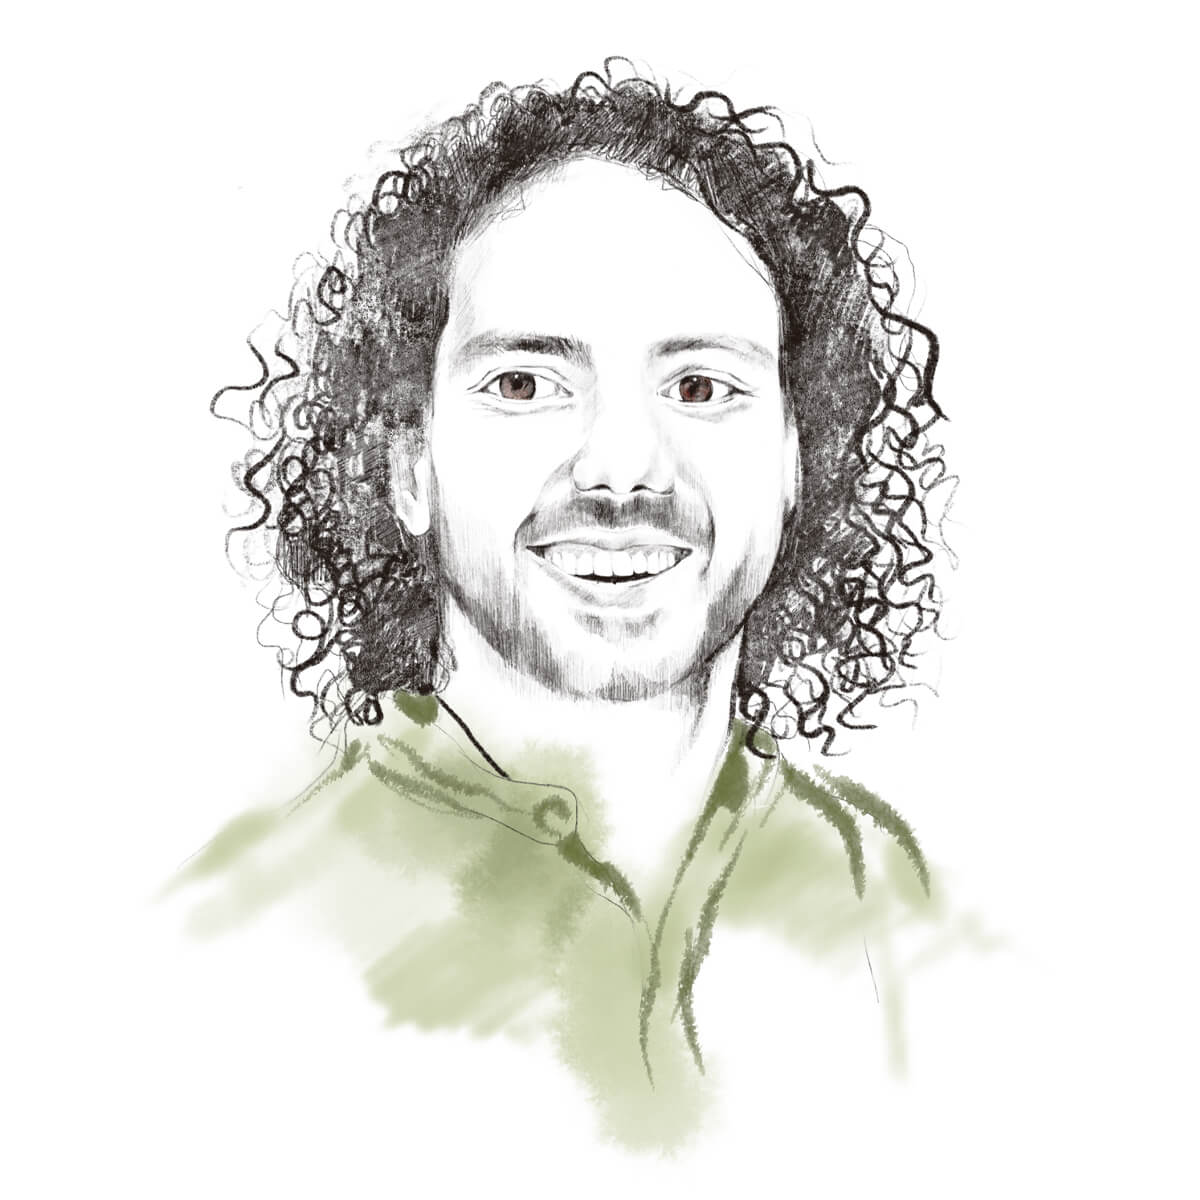 Illustration of Jiddo from The Free Folk Project